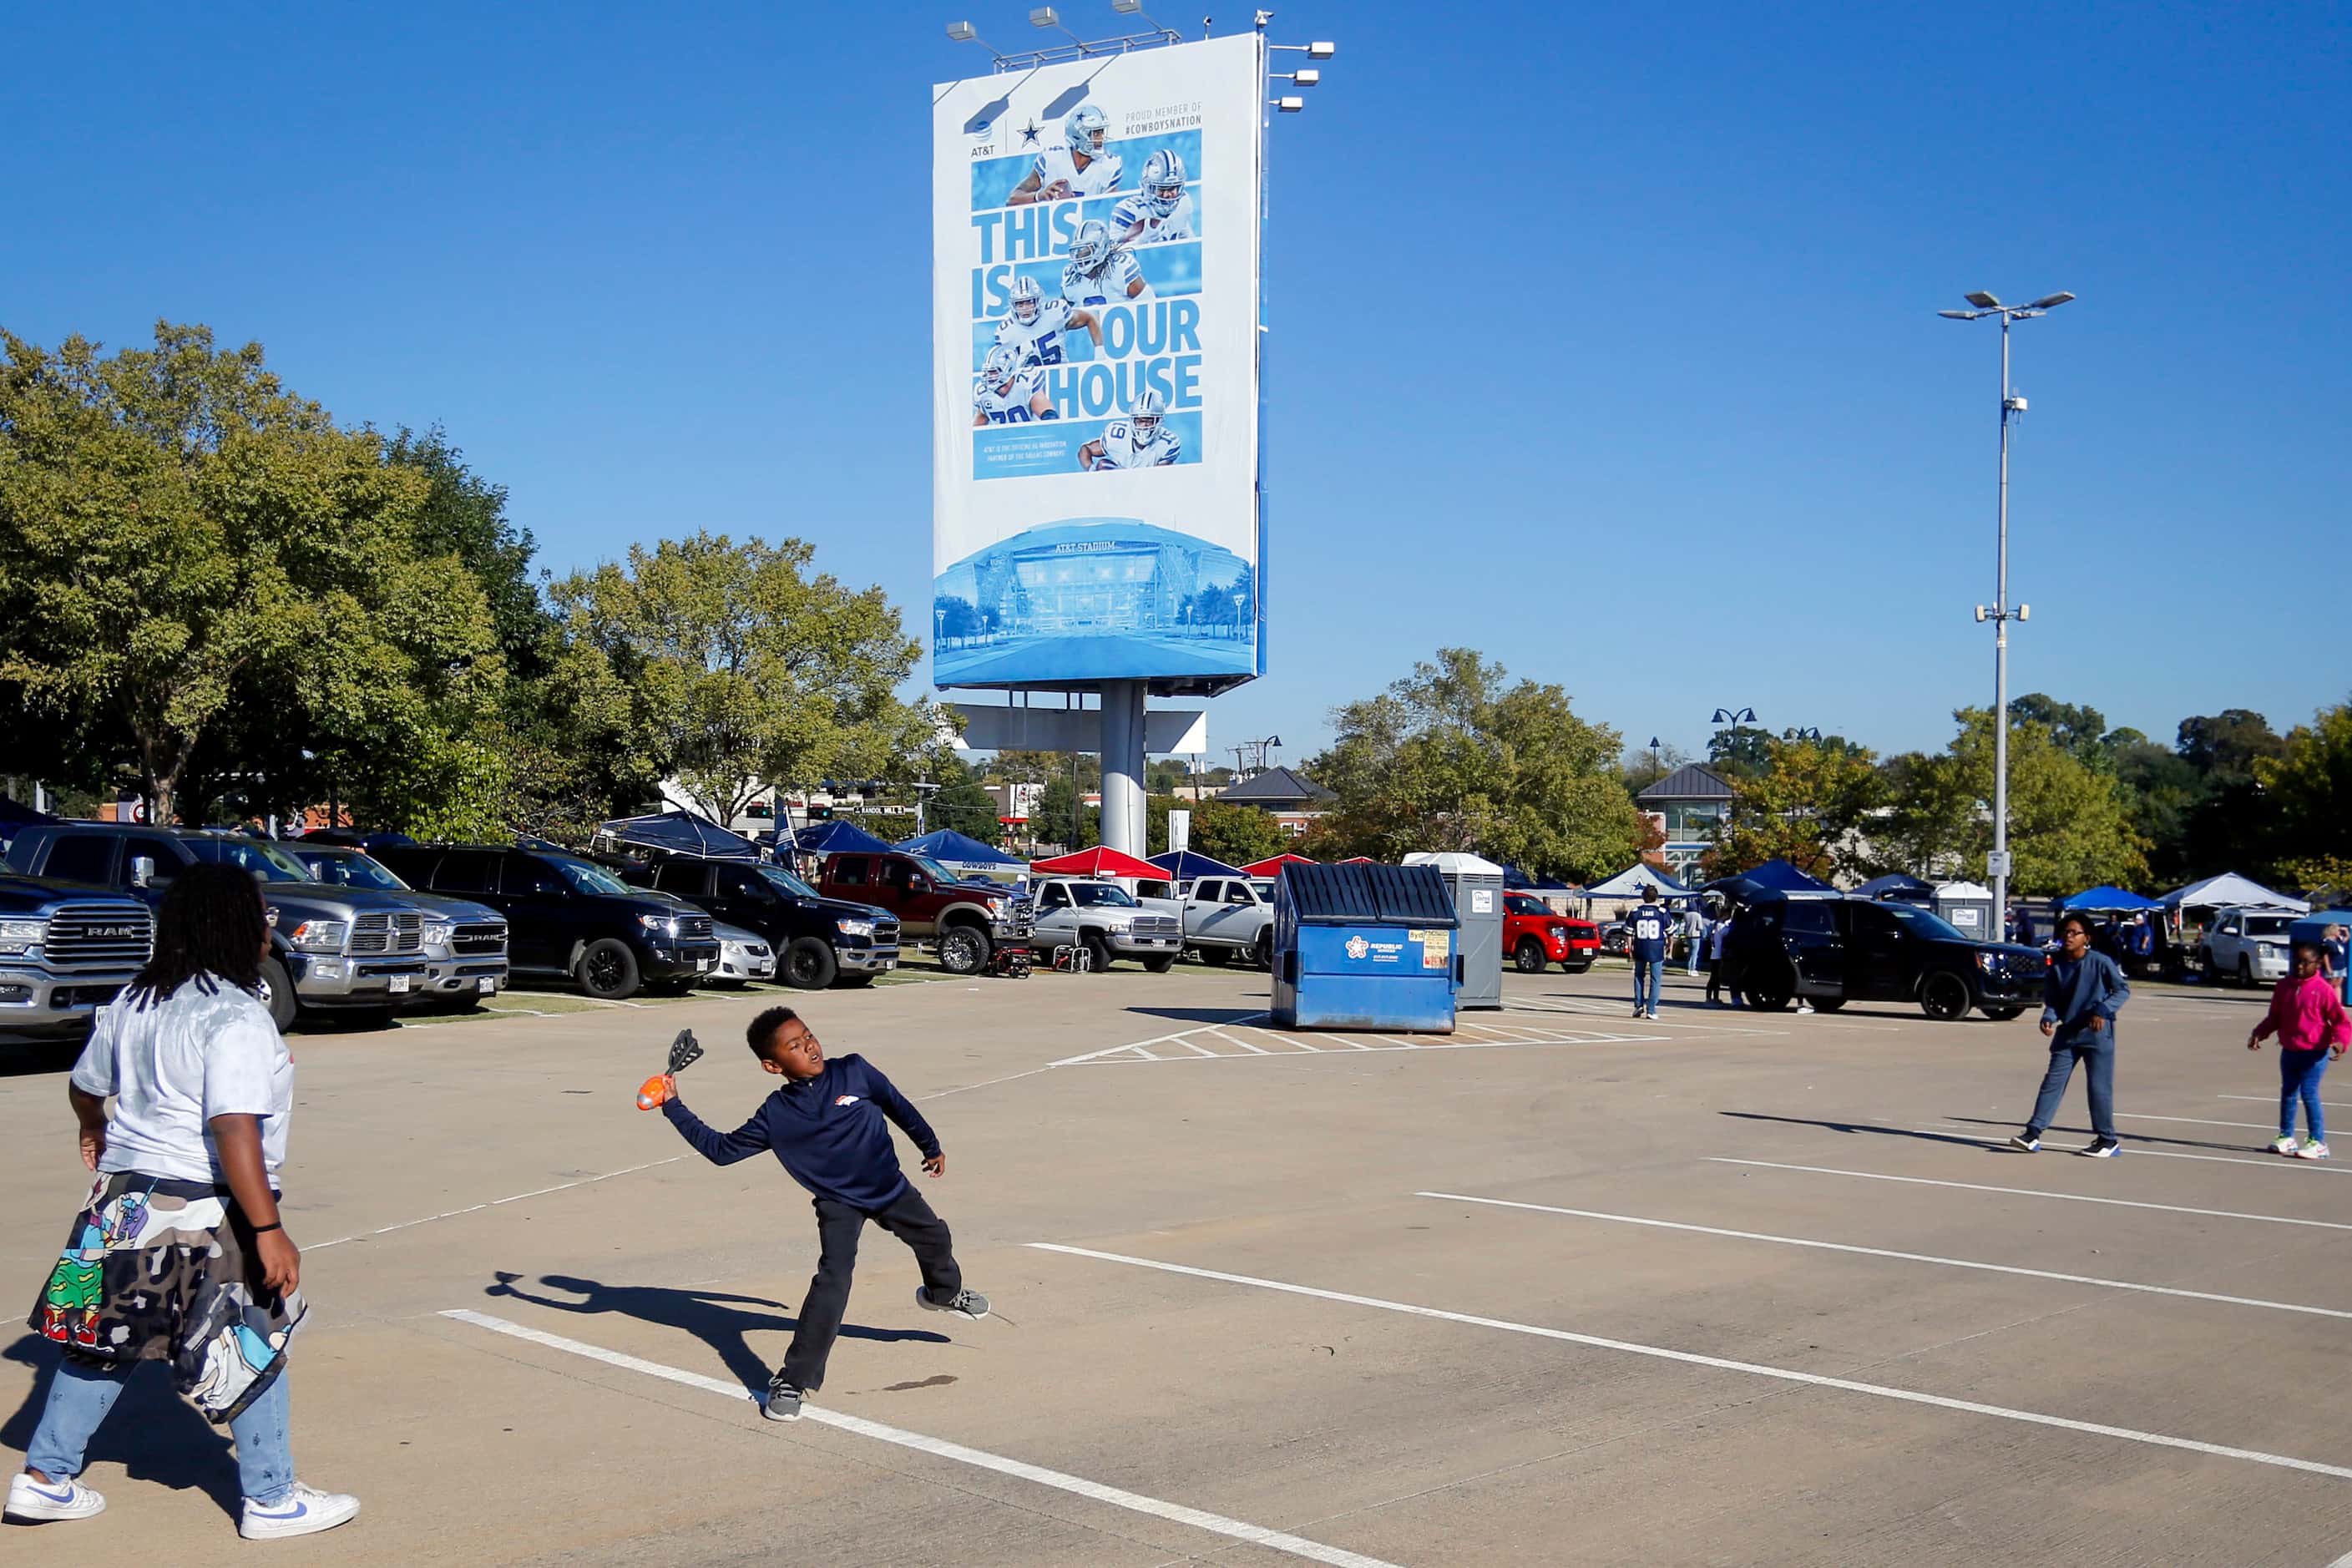 Kids play with a Nerf football on the AT&T Stadium Parking lots before the start of a NFL...